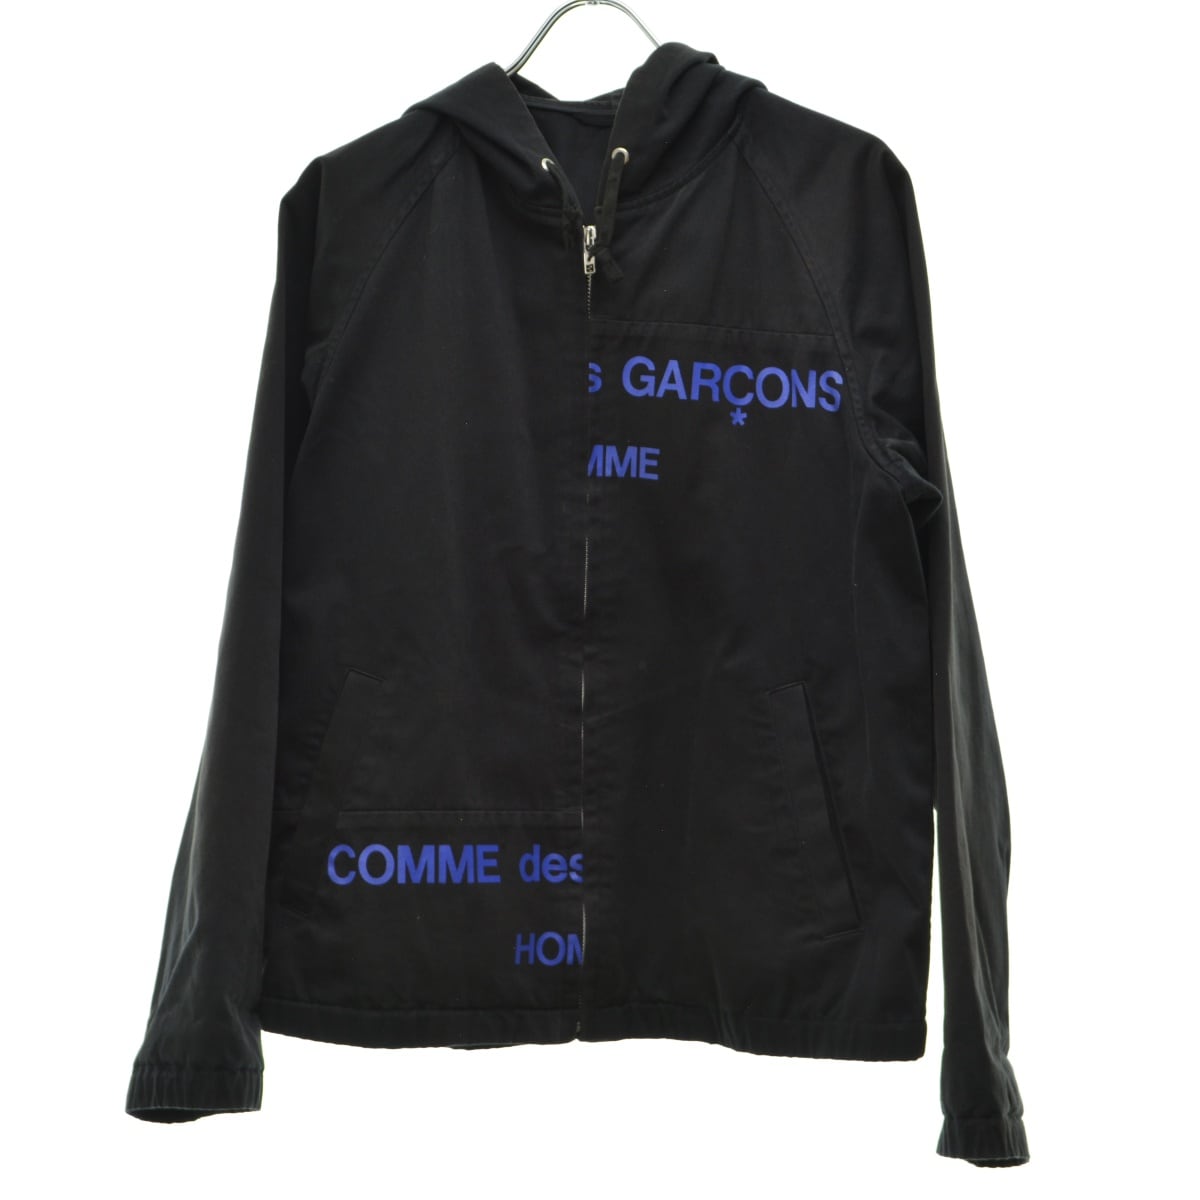 COMME des GARCONS HOMME / コムデギャルソン オム 02SS AD2001 SPLIT LOGO スプリットロゴパーカー  archive | カンフル京都裏寺店 powered by BASE